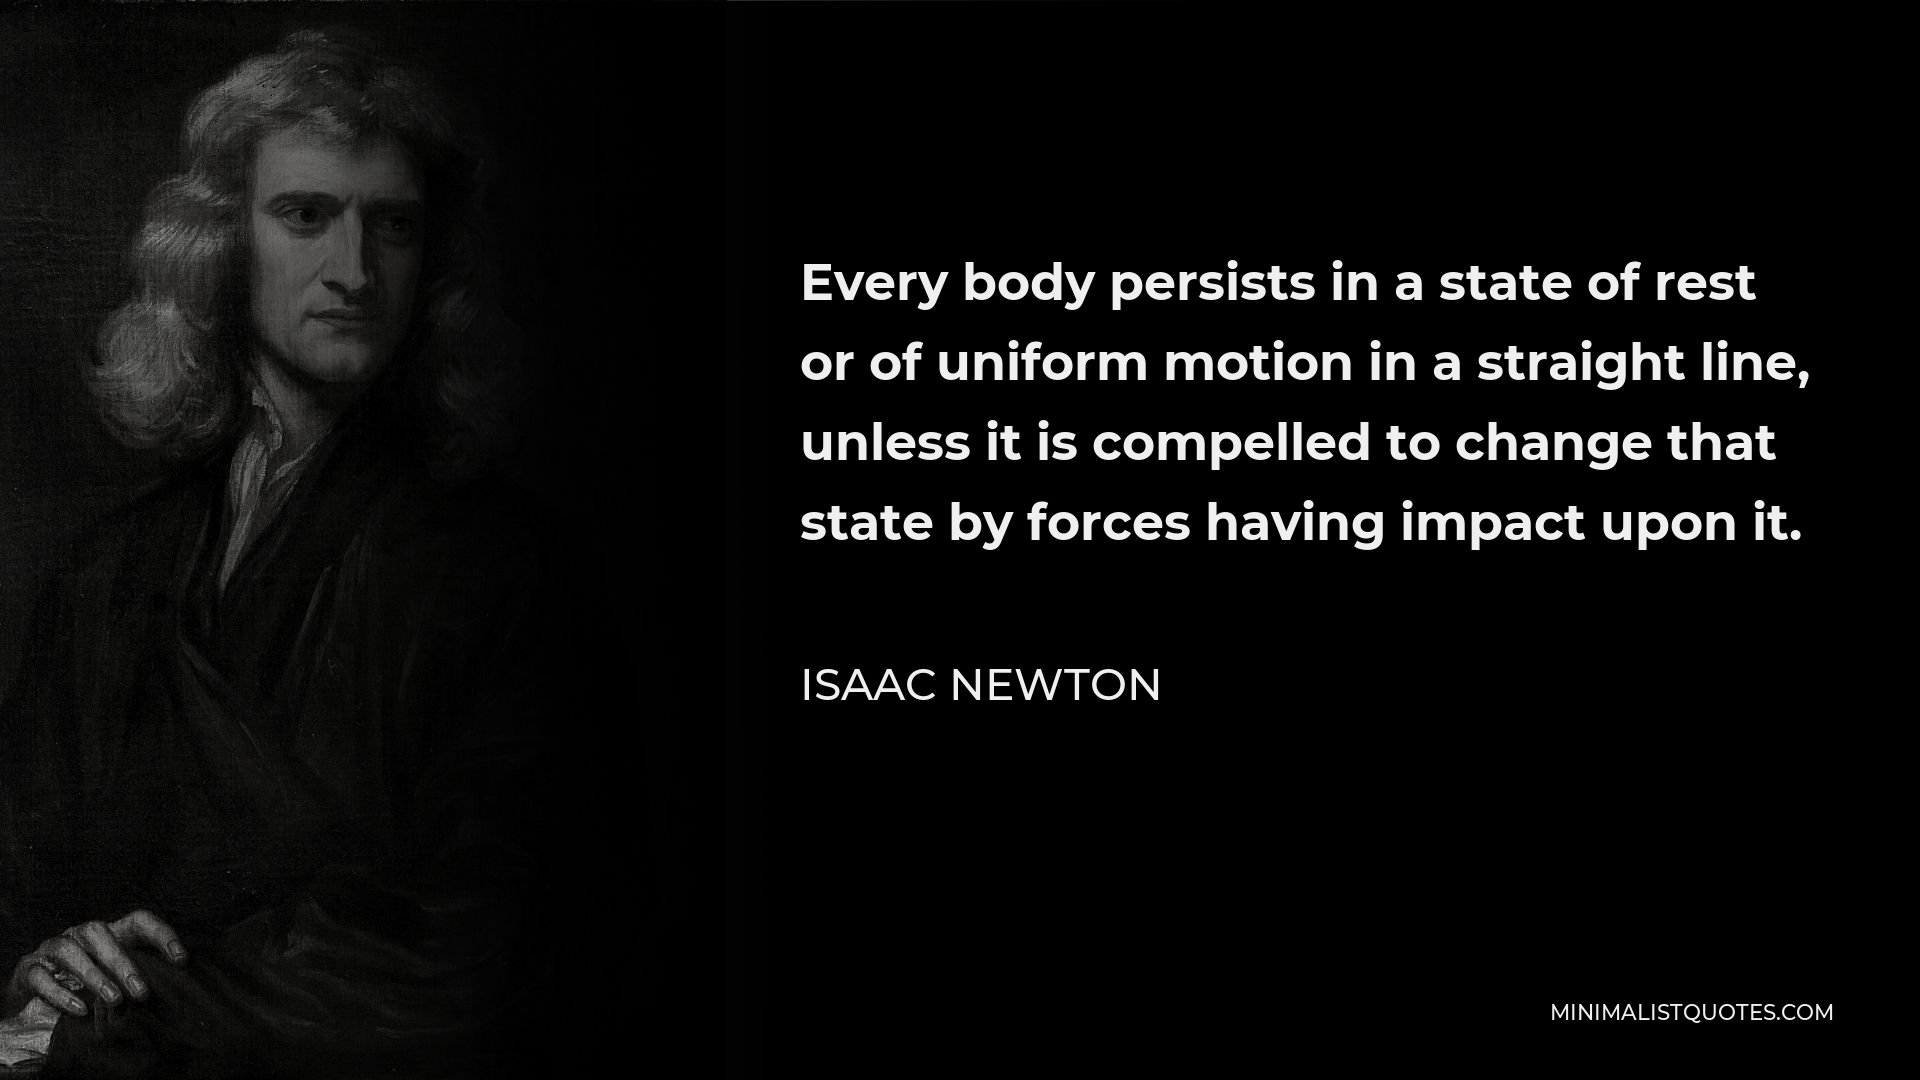 Isaac Newton Quote - Every body persists in a state of rest or of uniform motion in a straight line, unless it is compelled to change that state by forces having impact upon it.